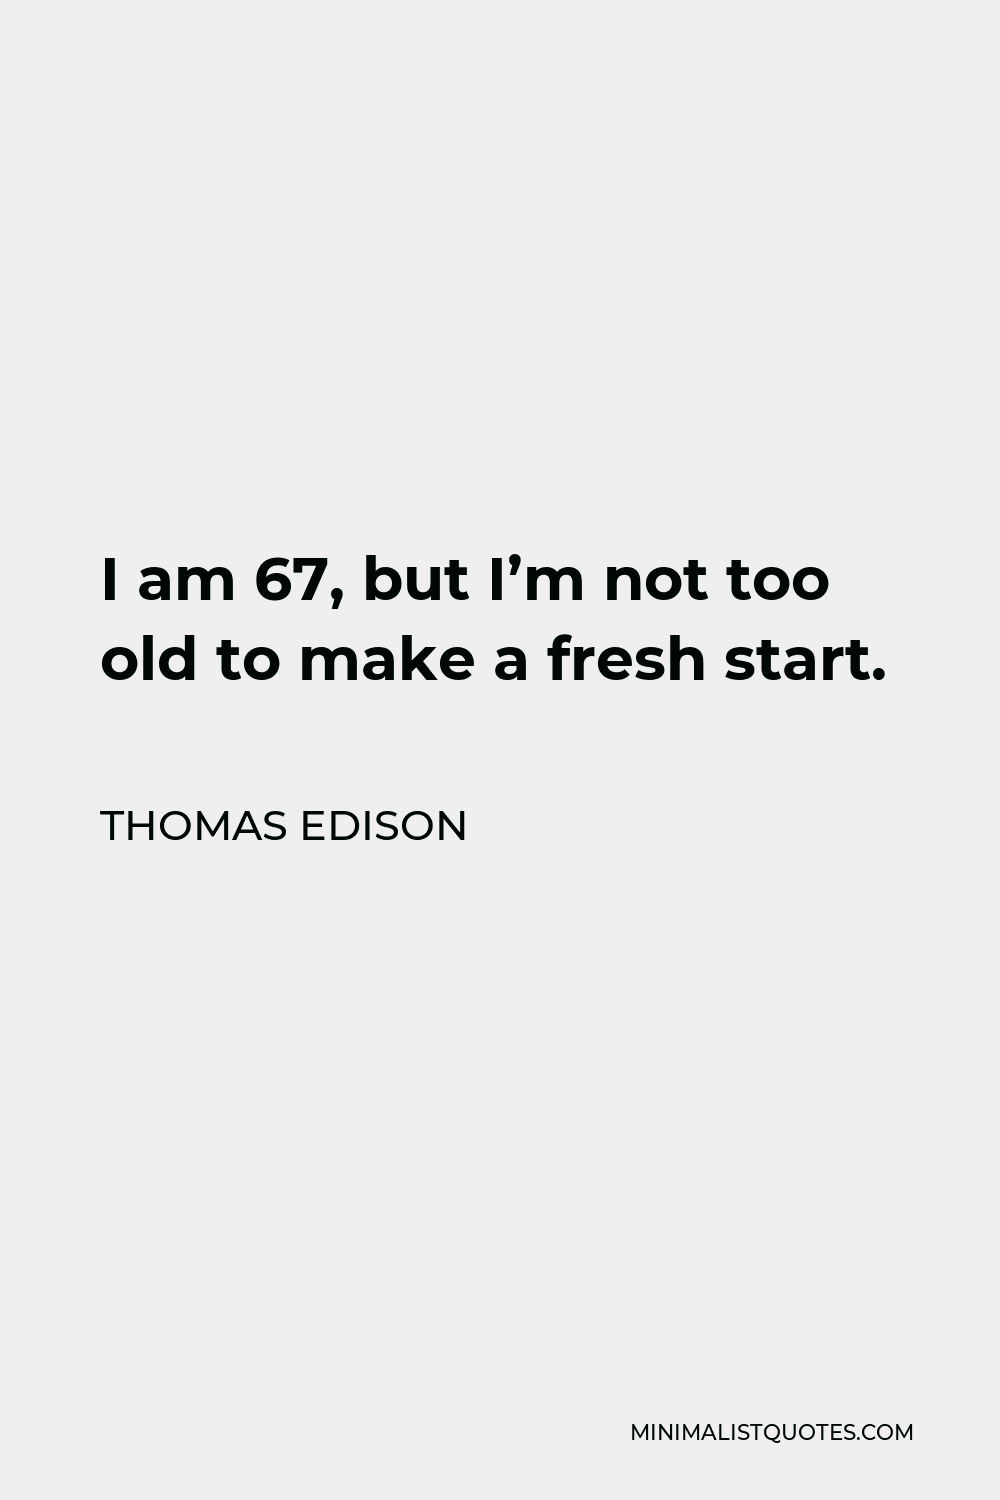 Thomas Edison Quote - I am 67, but I’m not too old to make a fresh start.